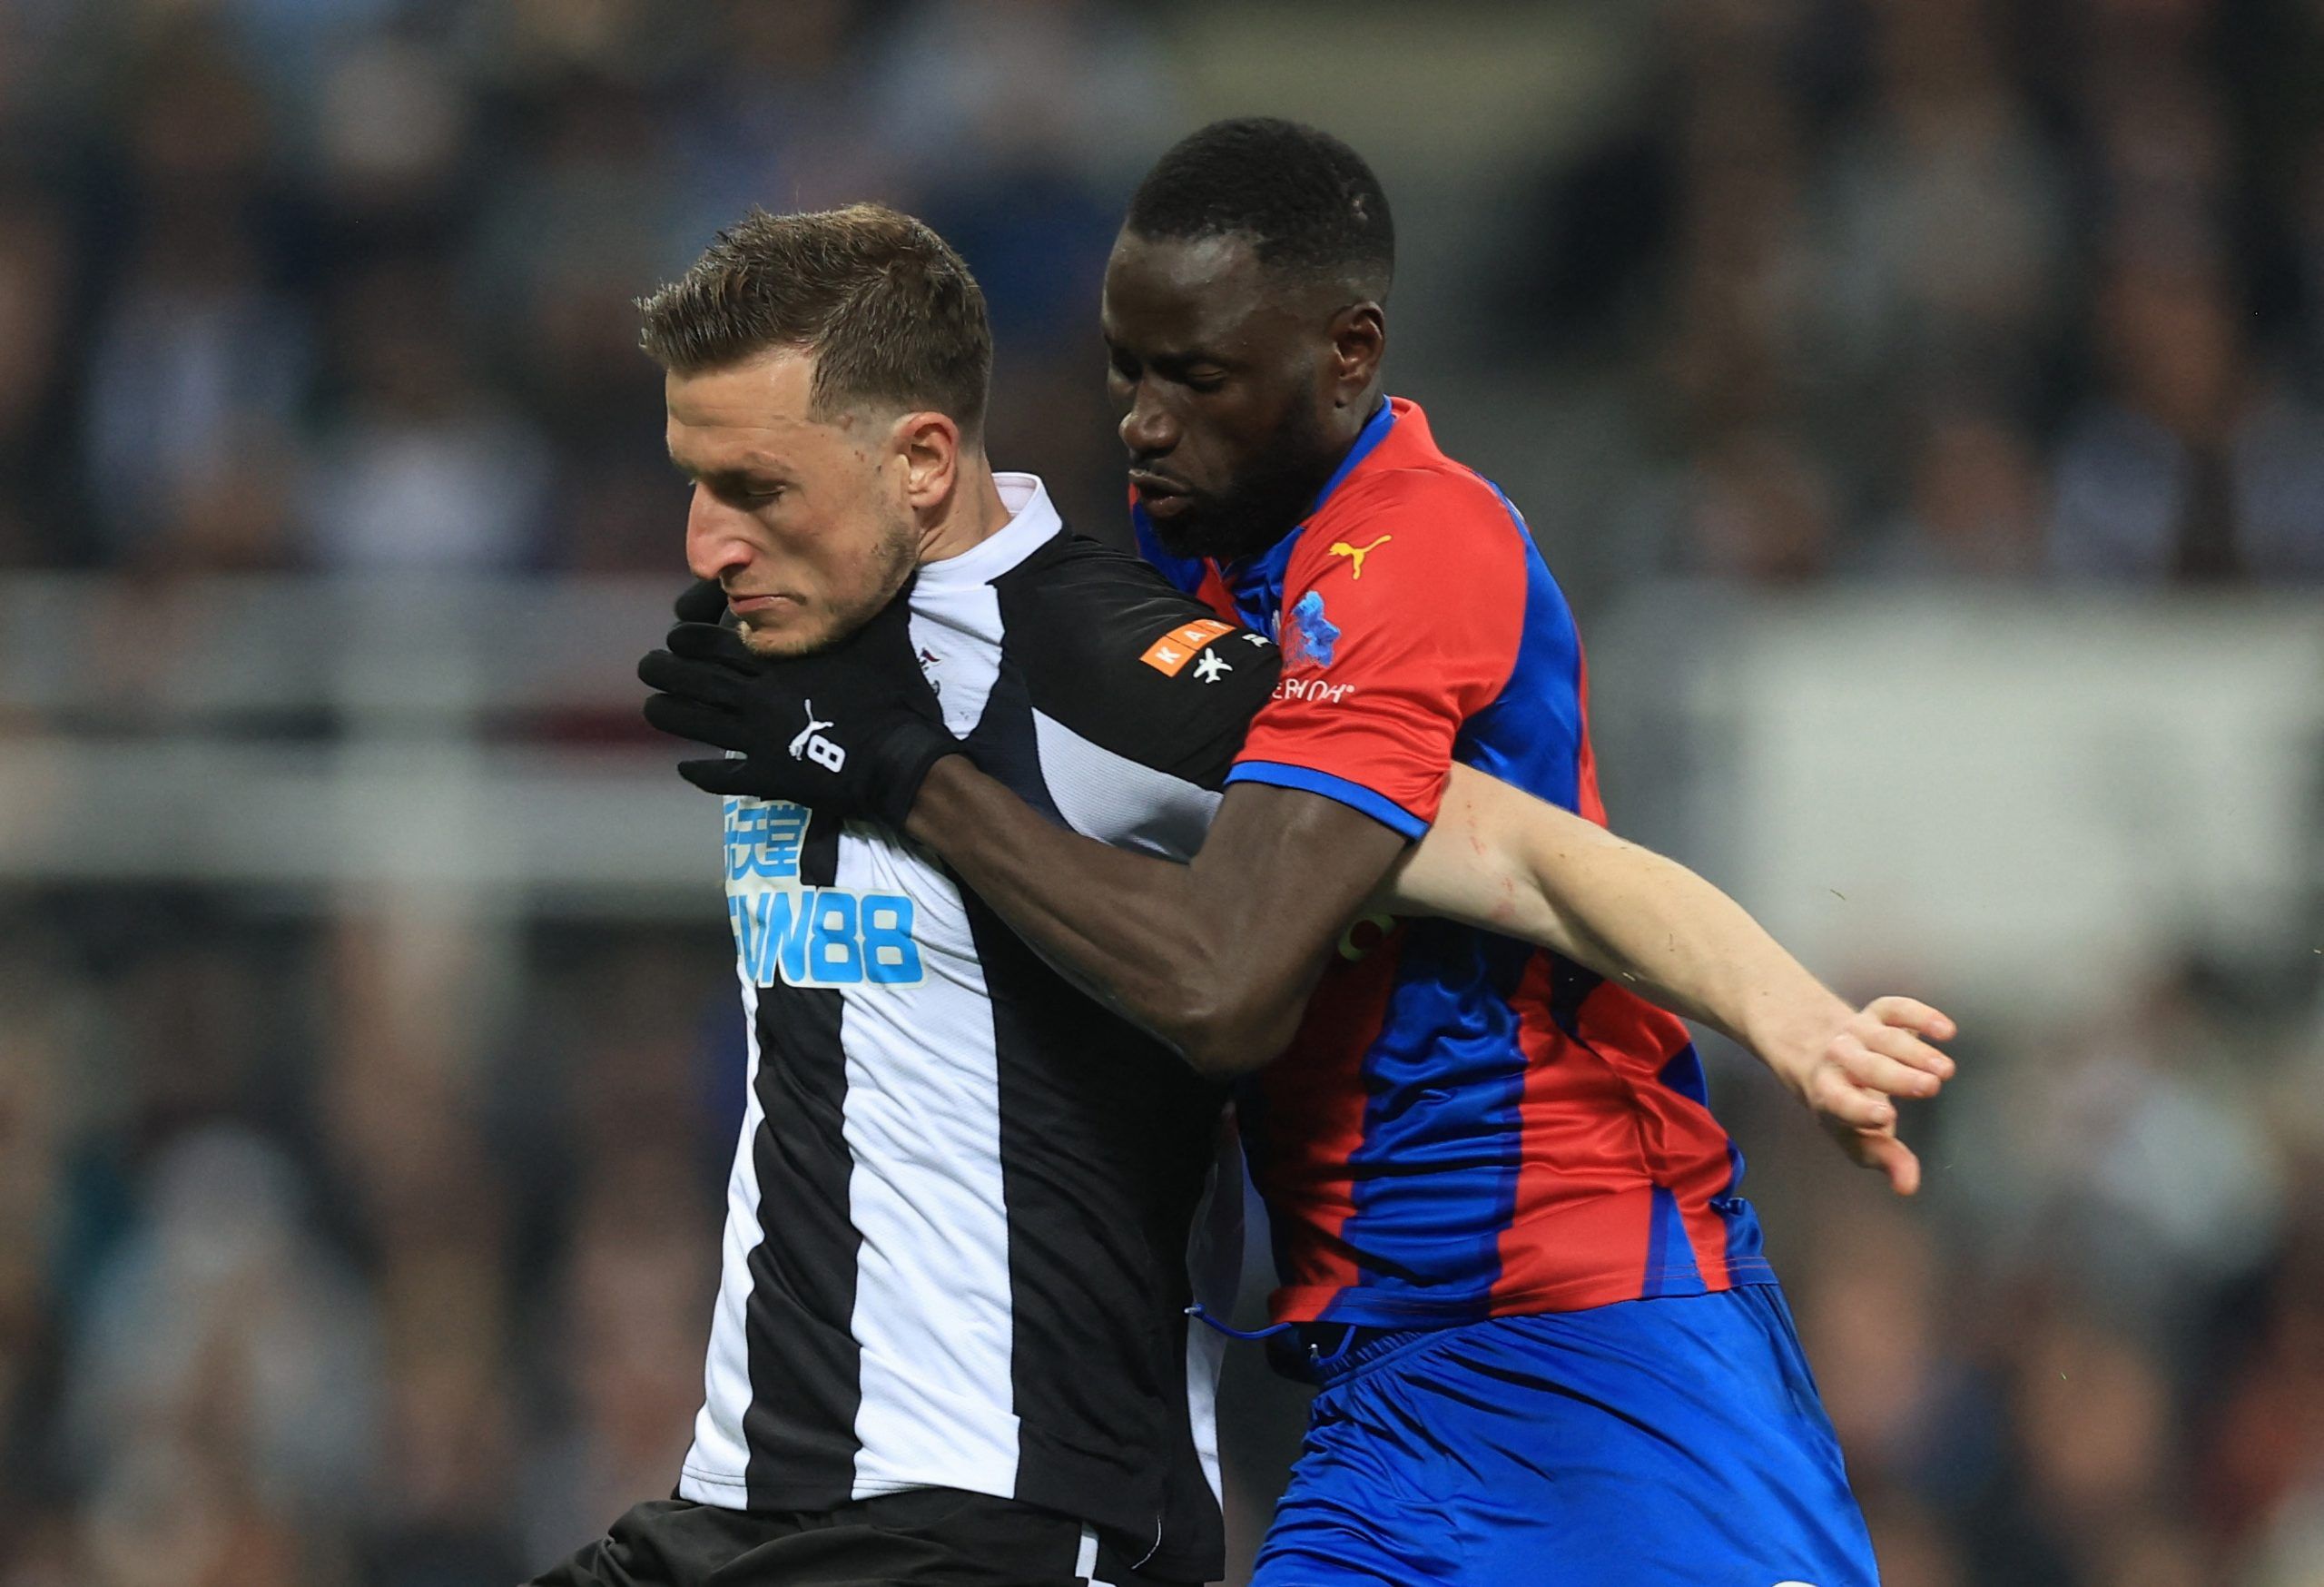 Newcastle United v Crystal Palace - St James' Park, Newcastle, Britain - April 20, 2022 Crystal Palace's Cheikhou Kouyate in action with Newcastle United's Chris Wood Action Images via Reuters/Lee Smith